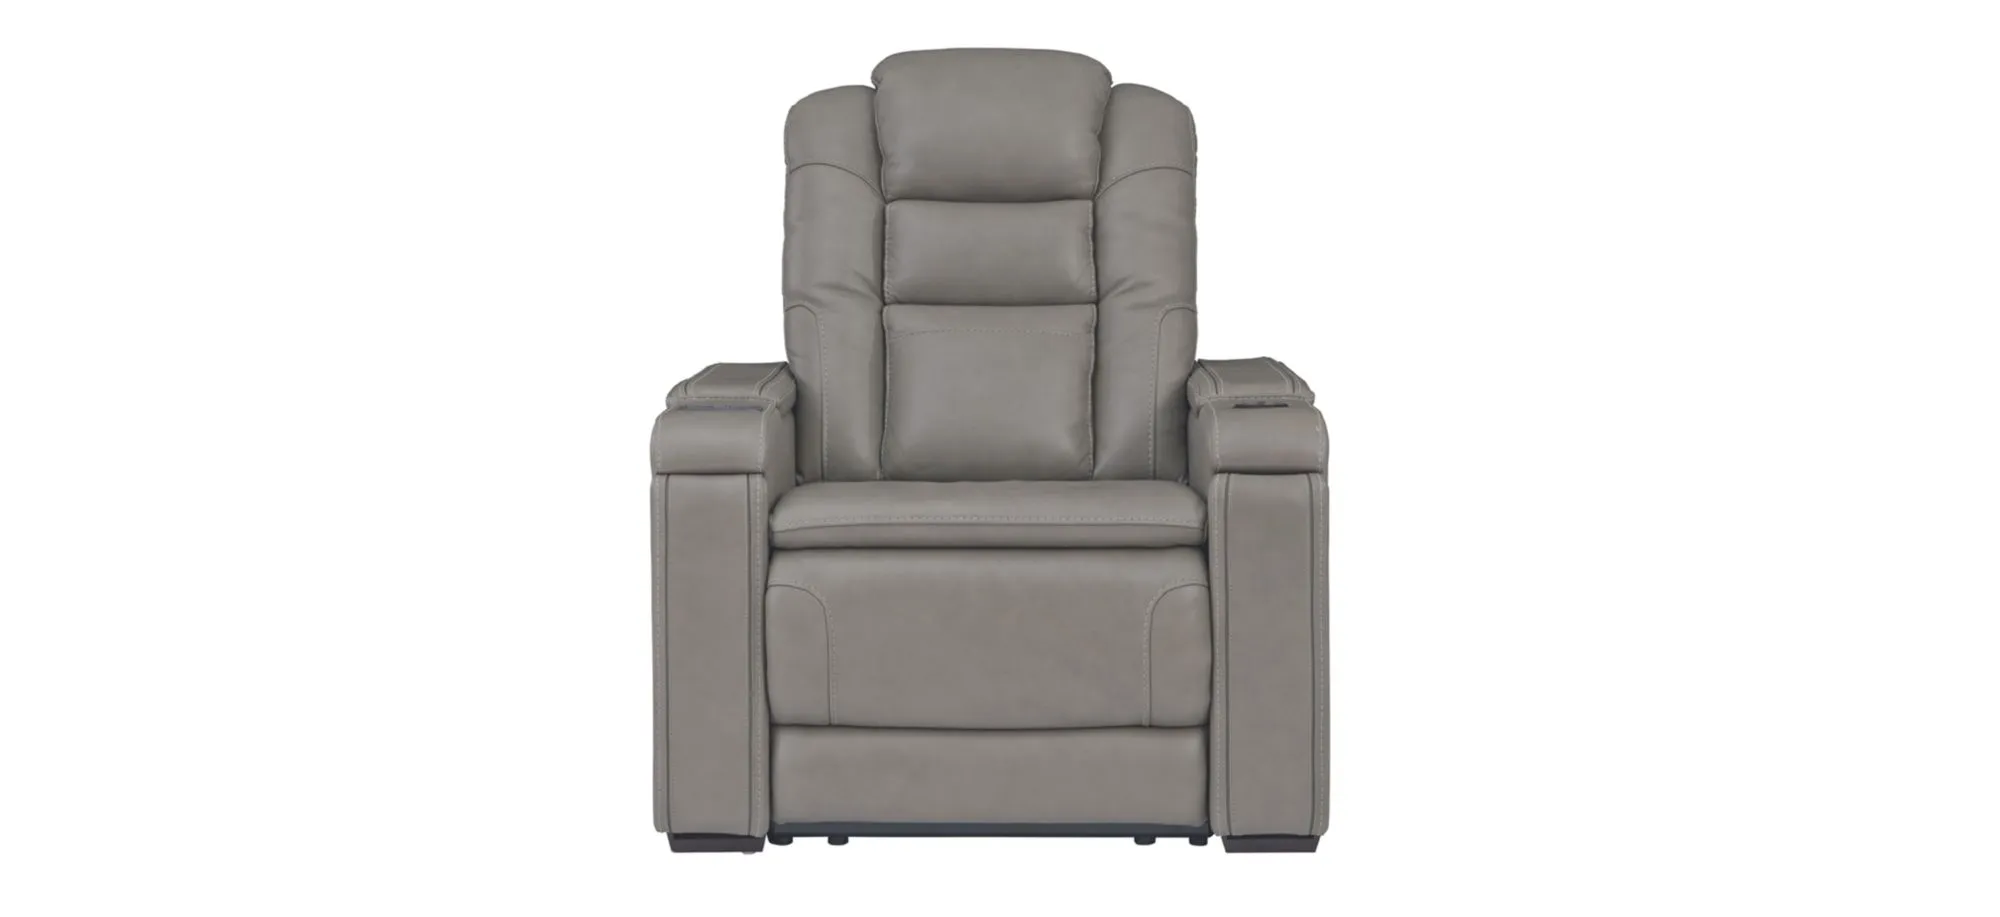 Boerna Power Recliner with Adjustable Headrest in Gray by Ashley Furniture